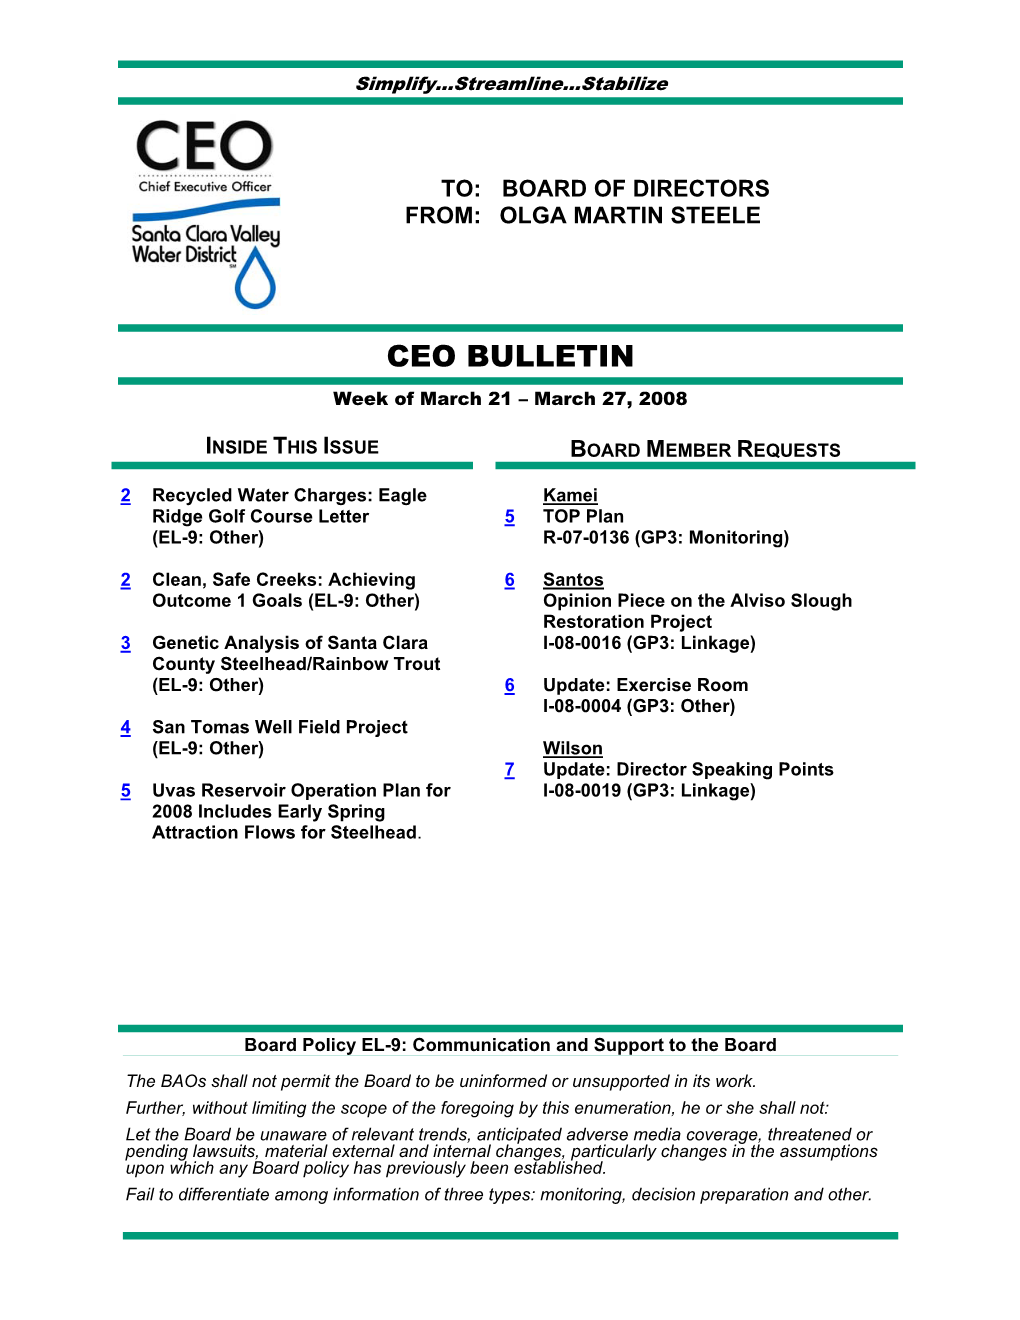 CEO BULLETIN Week of March 21 – March 27, 2008